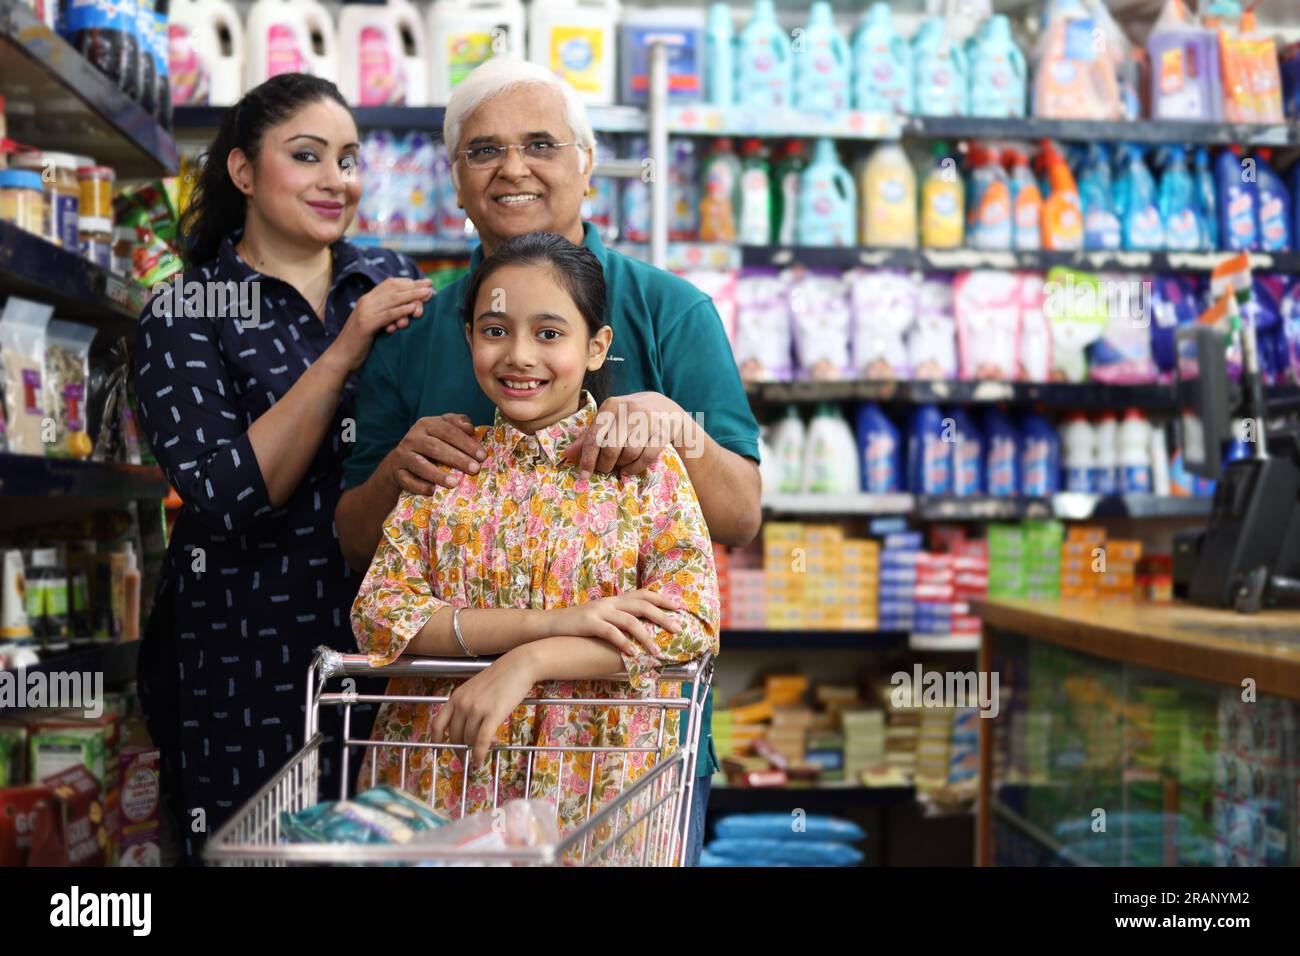 Happy Grandpa and Grand Daughters enjoying purchasing in grocery store. Buying grocery for home in hypermarket. Grand daughter and daughter in law. Stock Photo